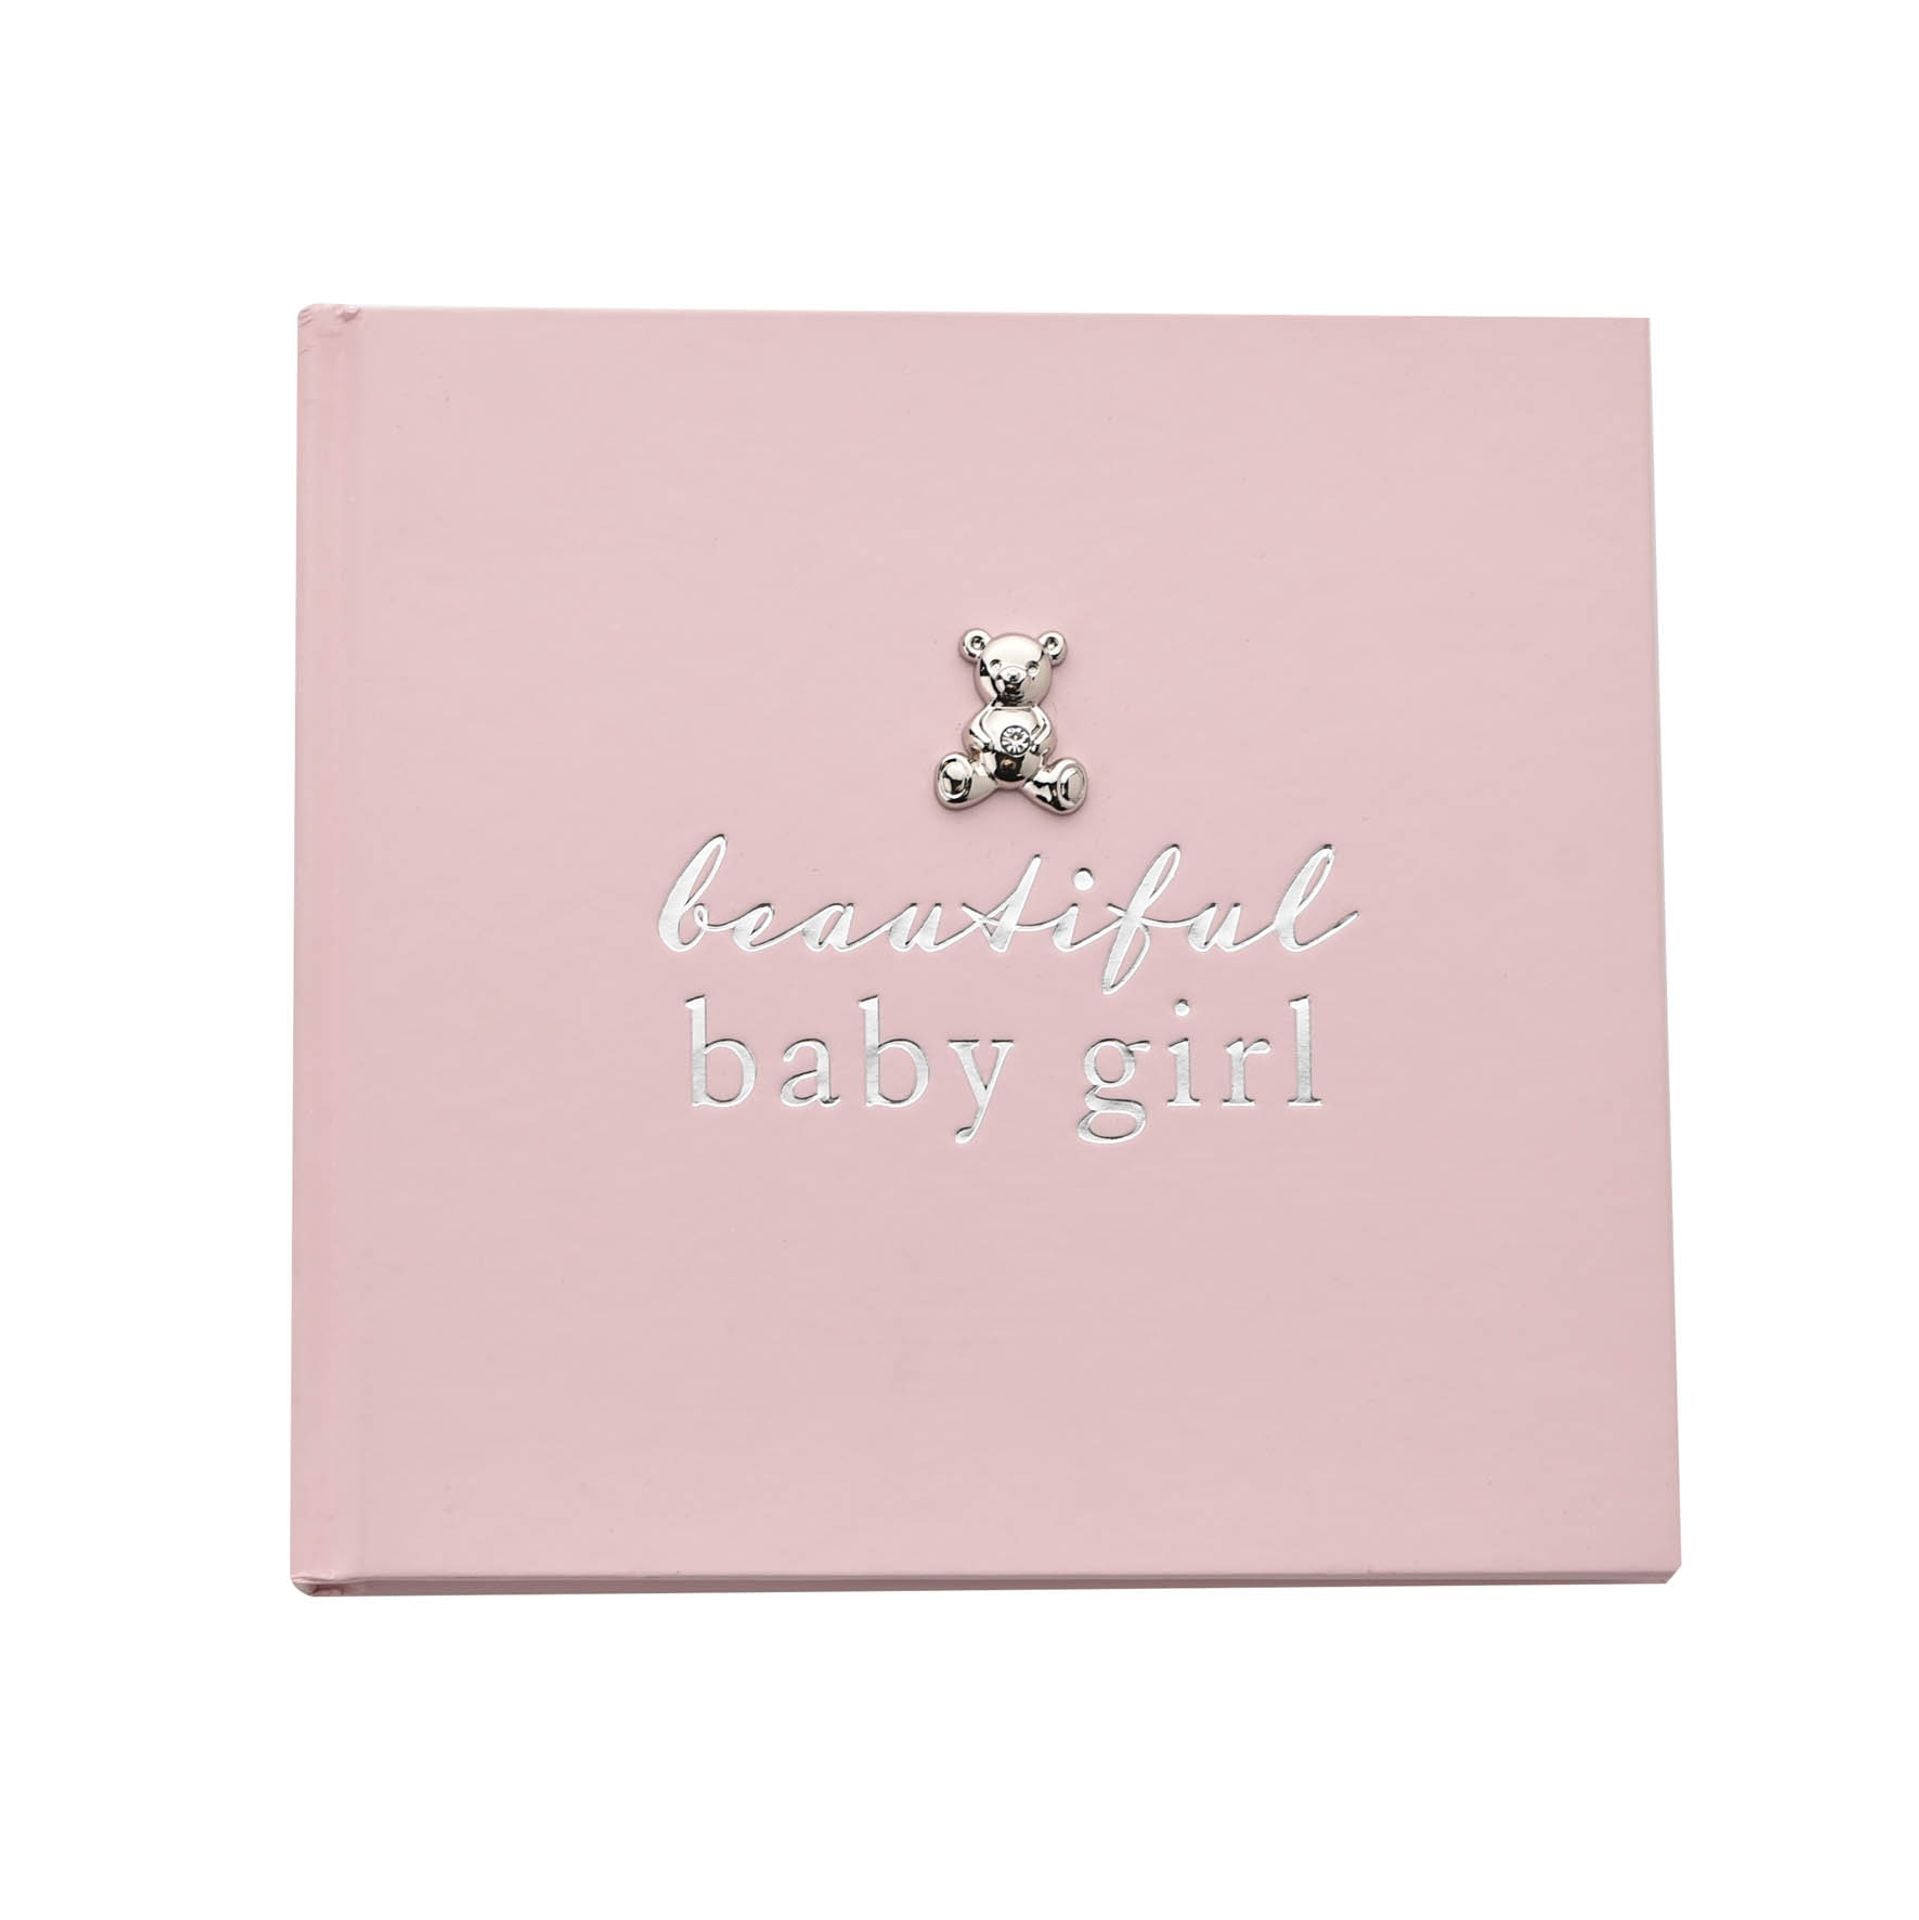 This adorable pink album allows parents to present photographs of their new born son with a personalised touch. The perfect gift for a newborn!